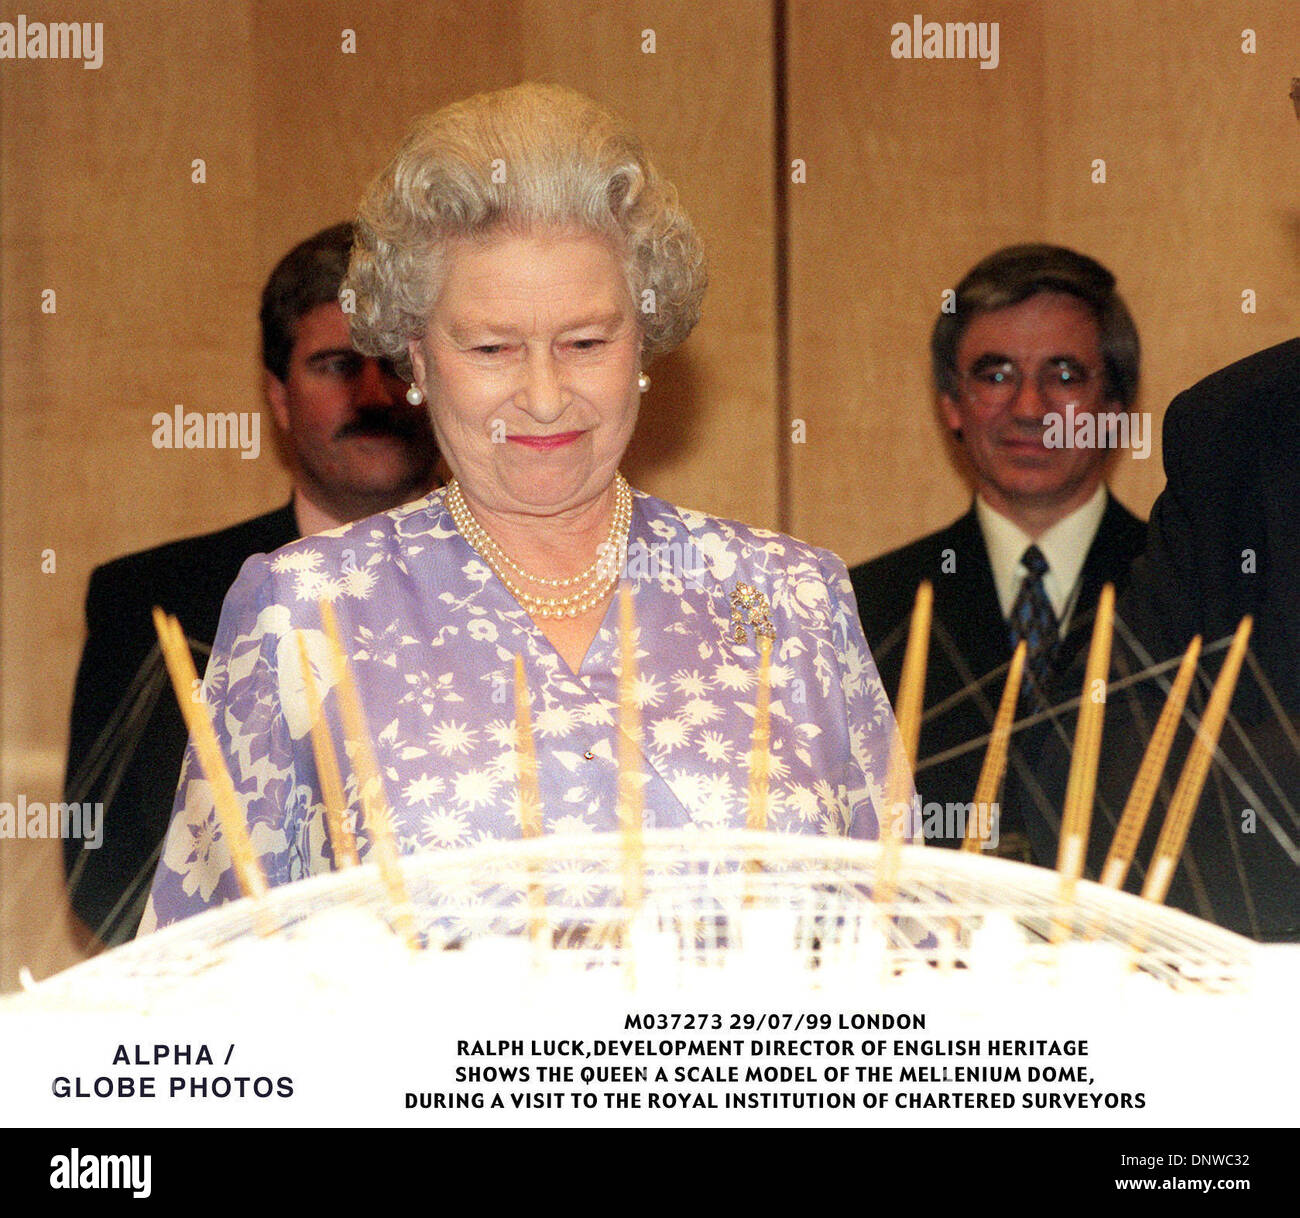 July 29, 1999 - London, Great Britain - The Queen admires a scale model of the Millennium Dome, during a visit Thursday 29th July, to the Royal Institution of Chartered Surveyors, in London.(Credit Image: © Globe Photos/ZUMAPRESS.com) Stock Photo